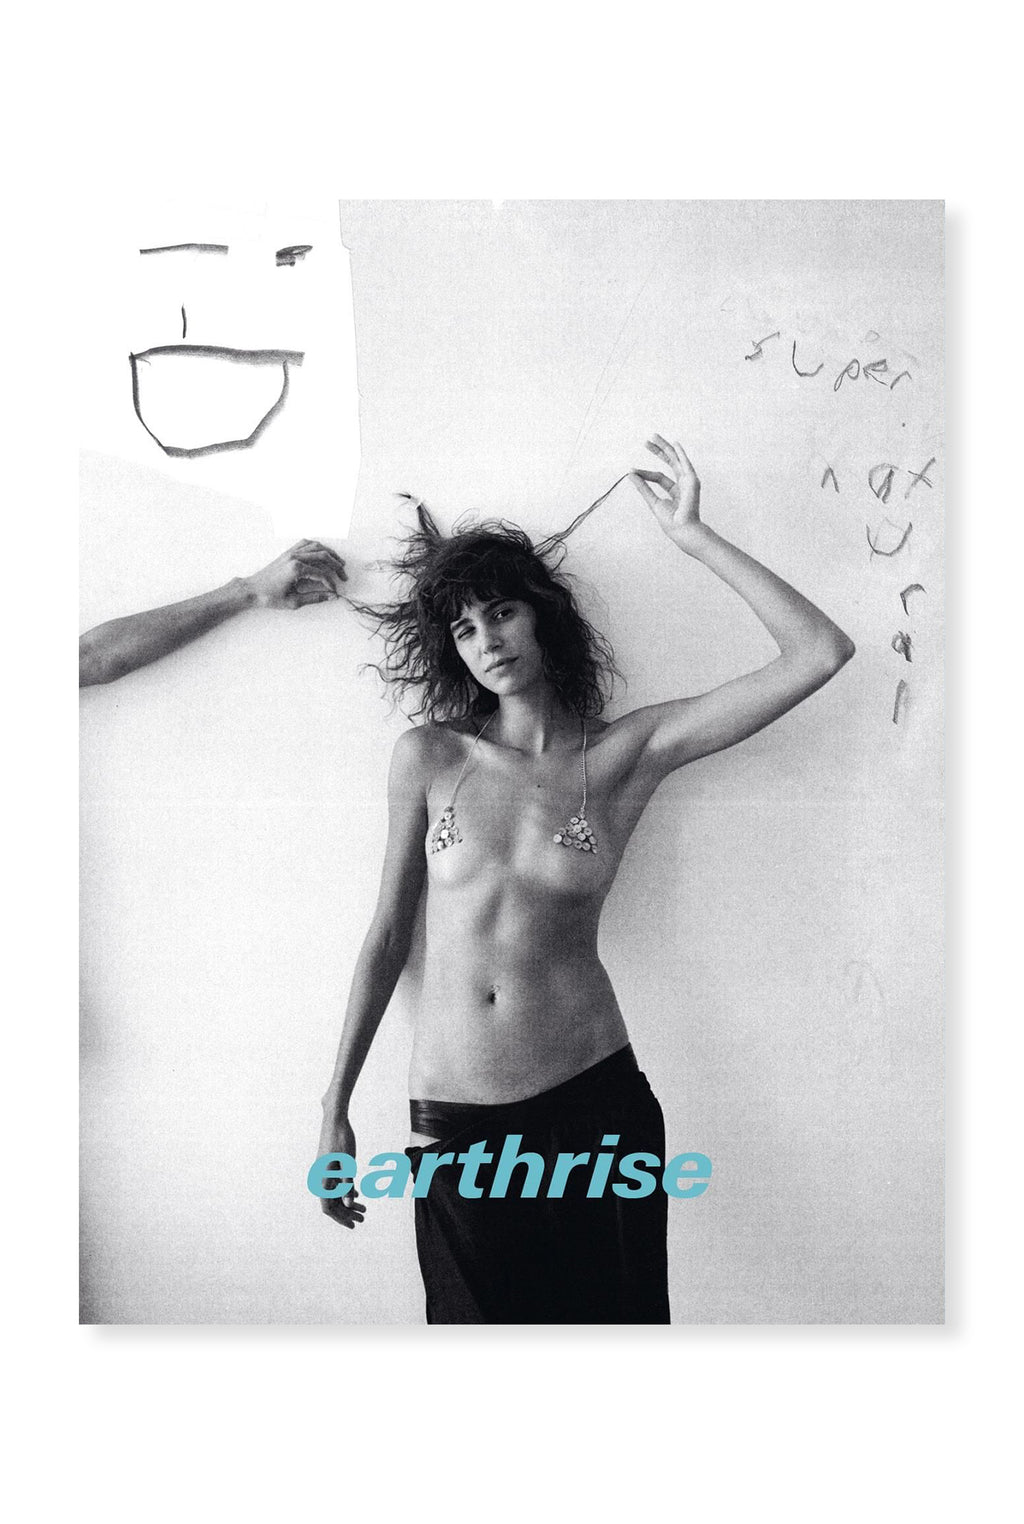 i-D, Issue 368 - Earthrise